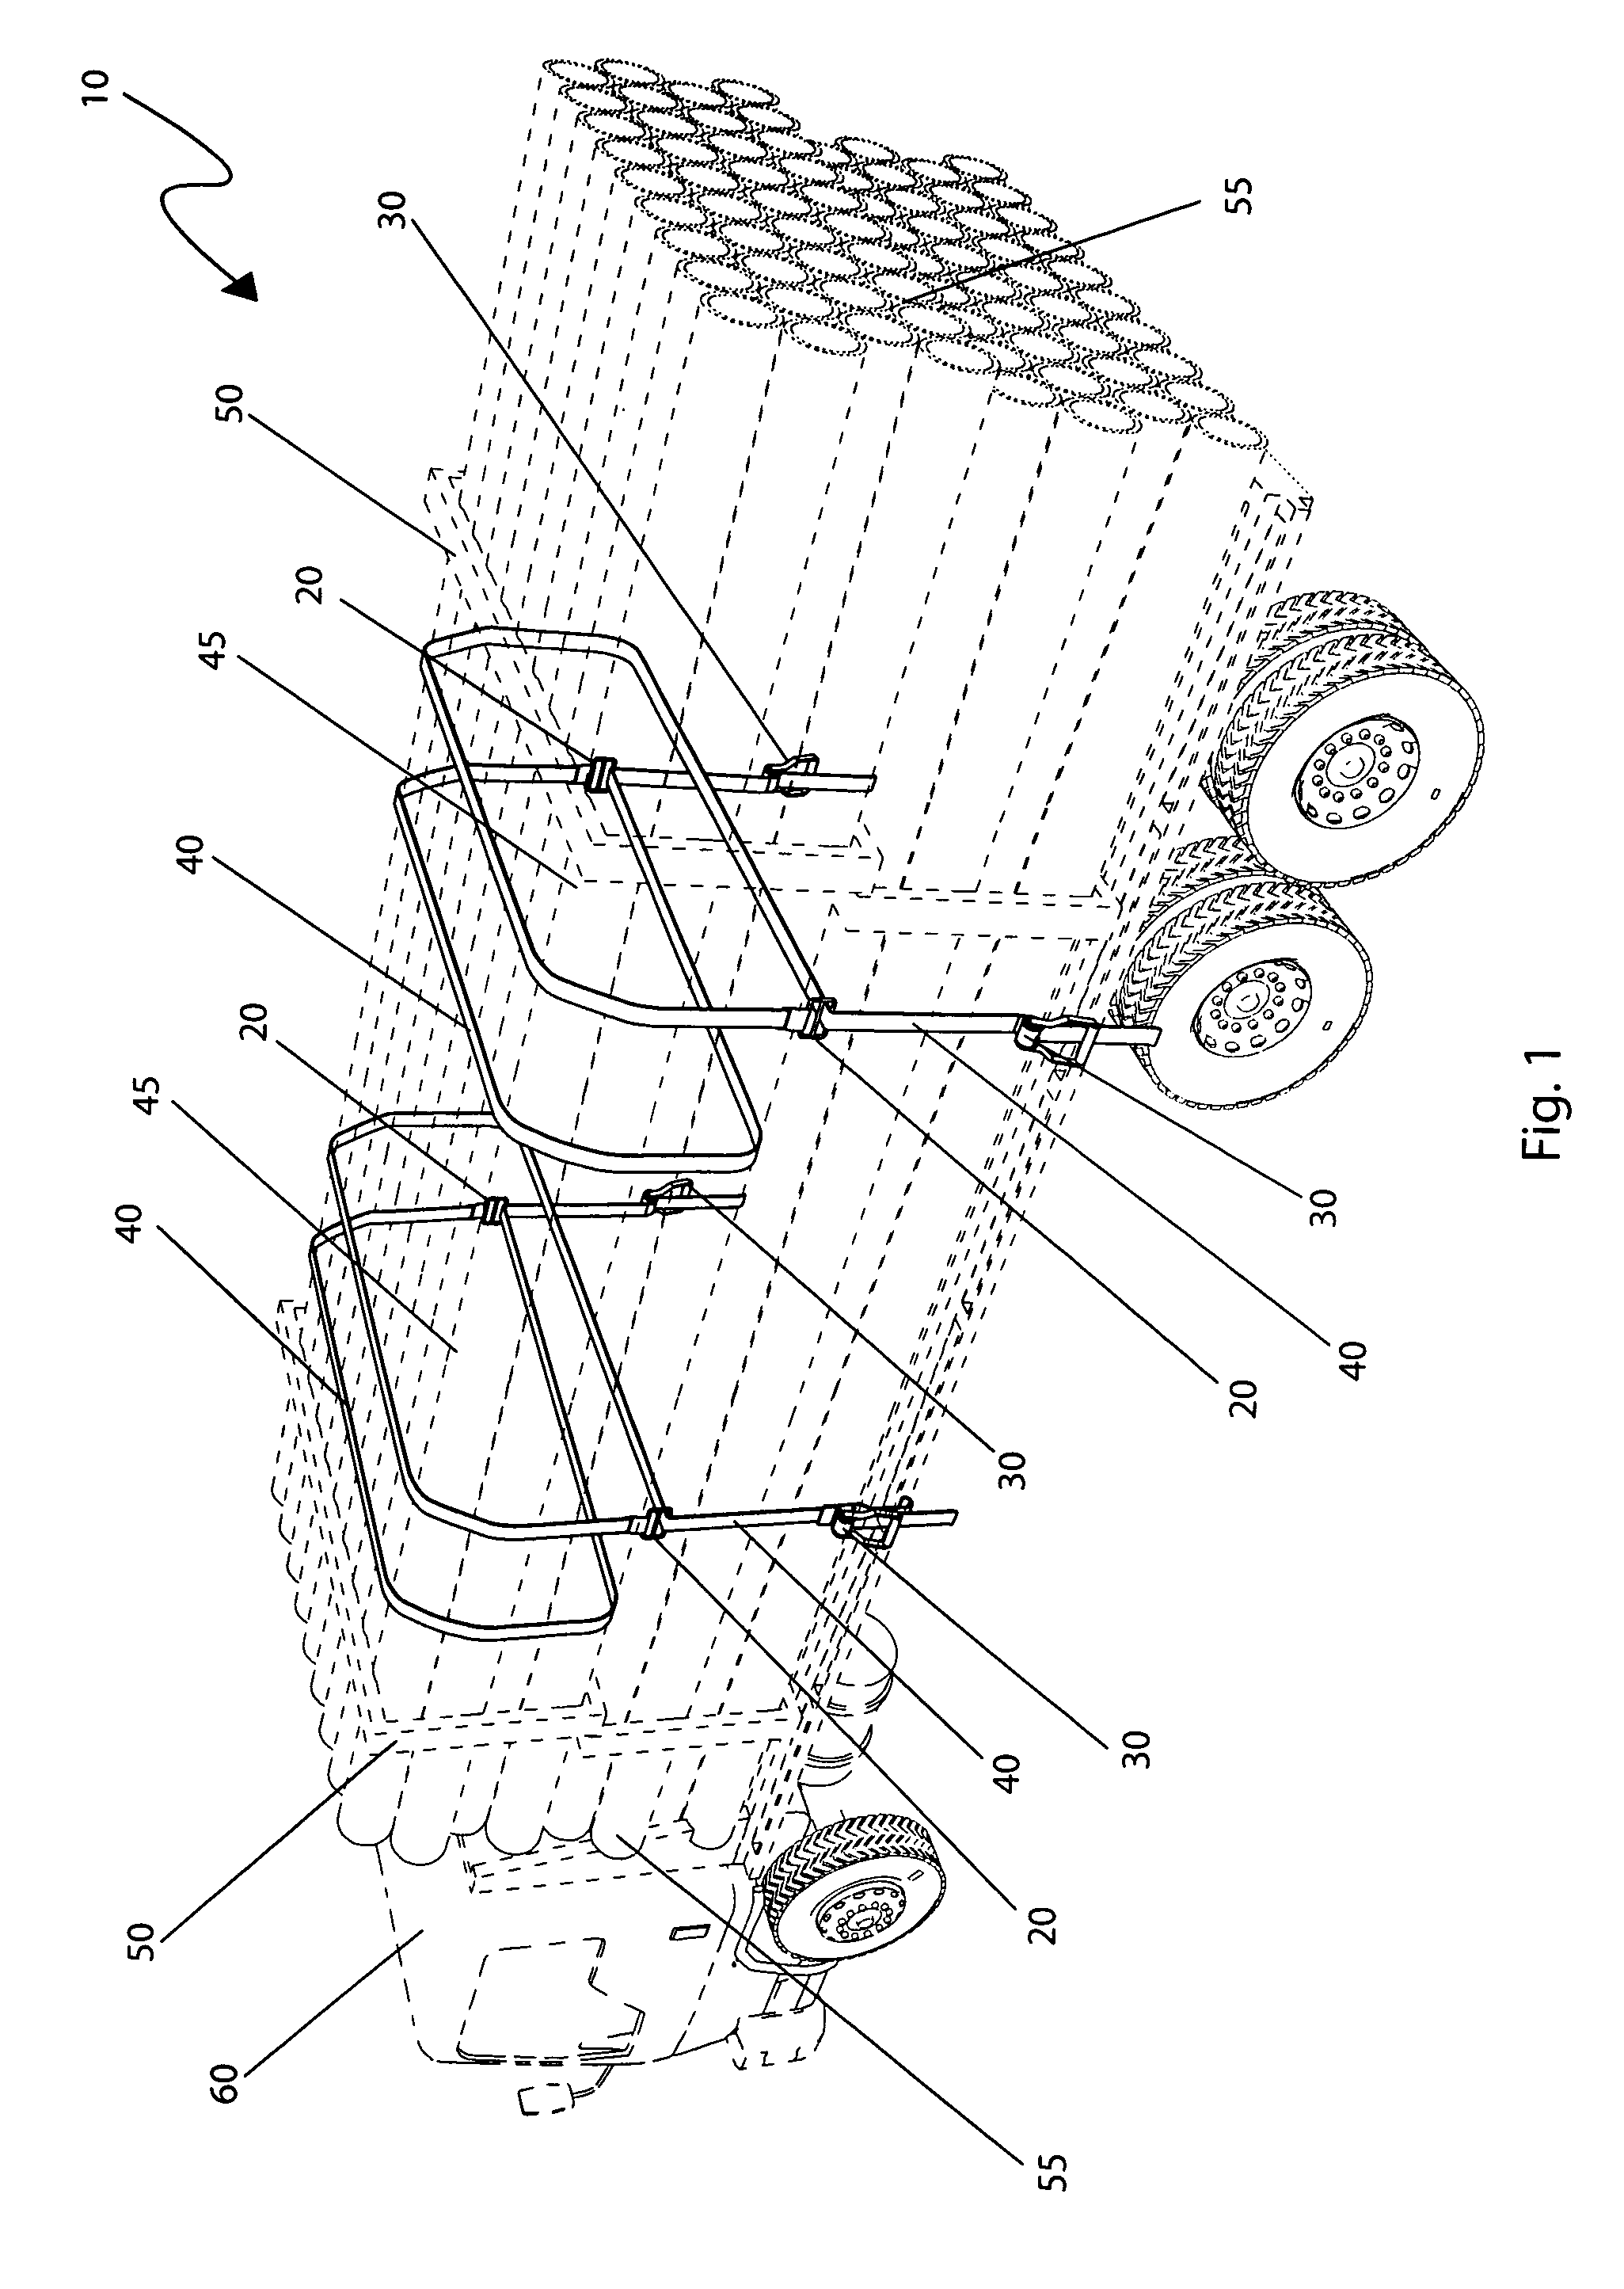 Strap links stabilizing system for flatbed trucks and associated use therefor